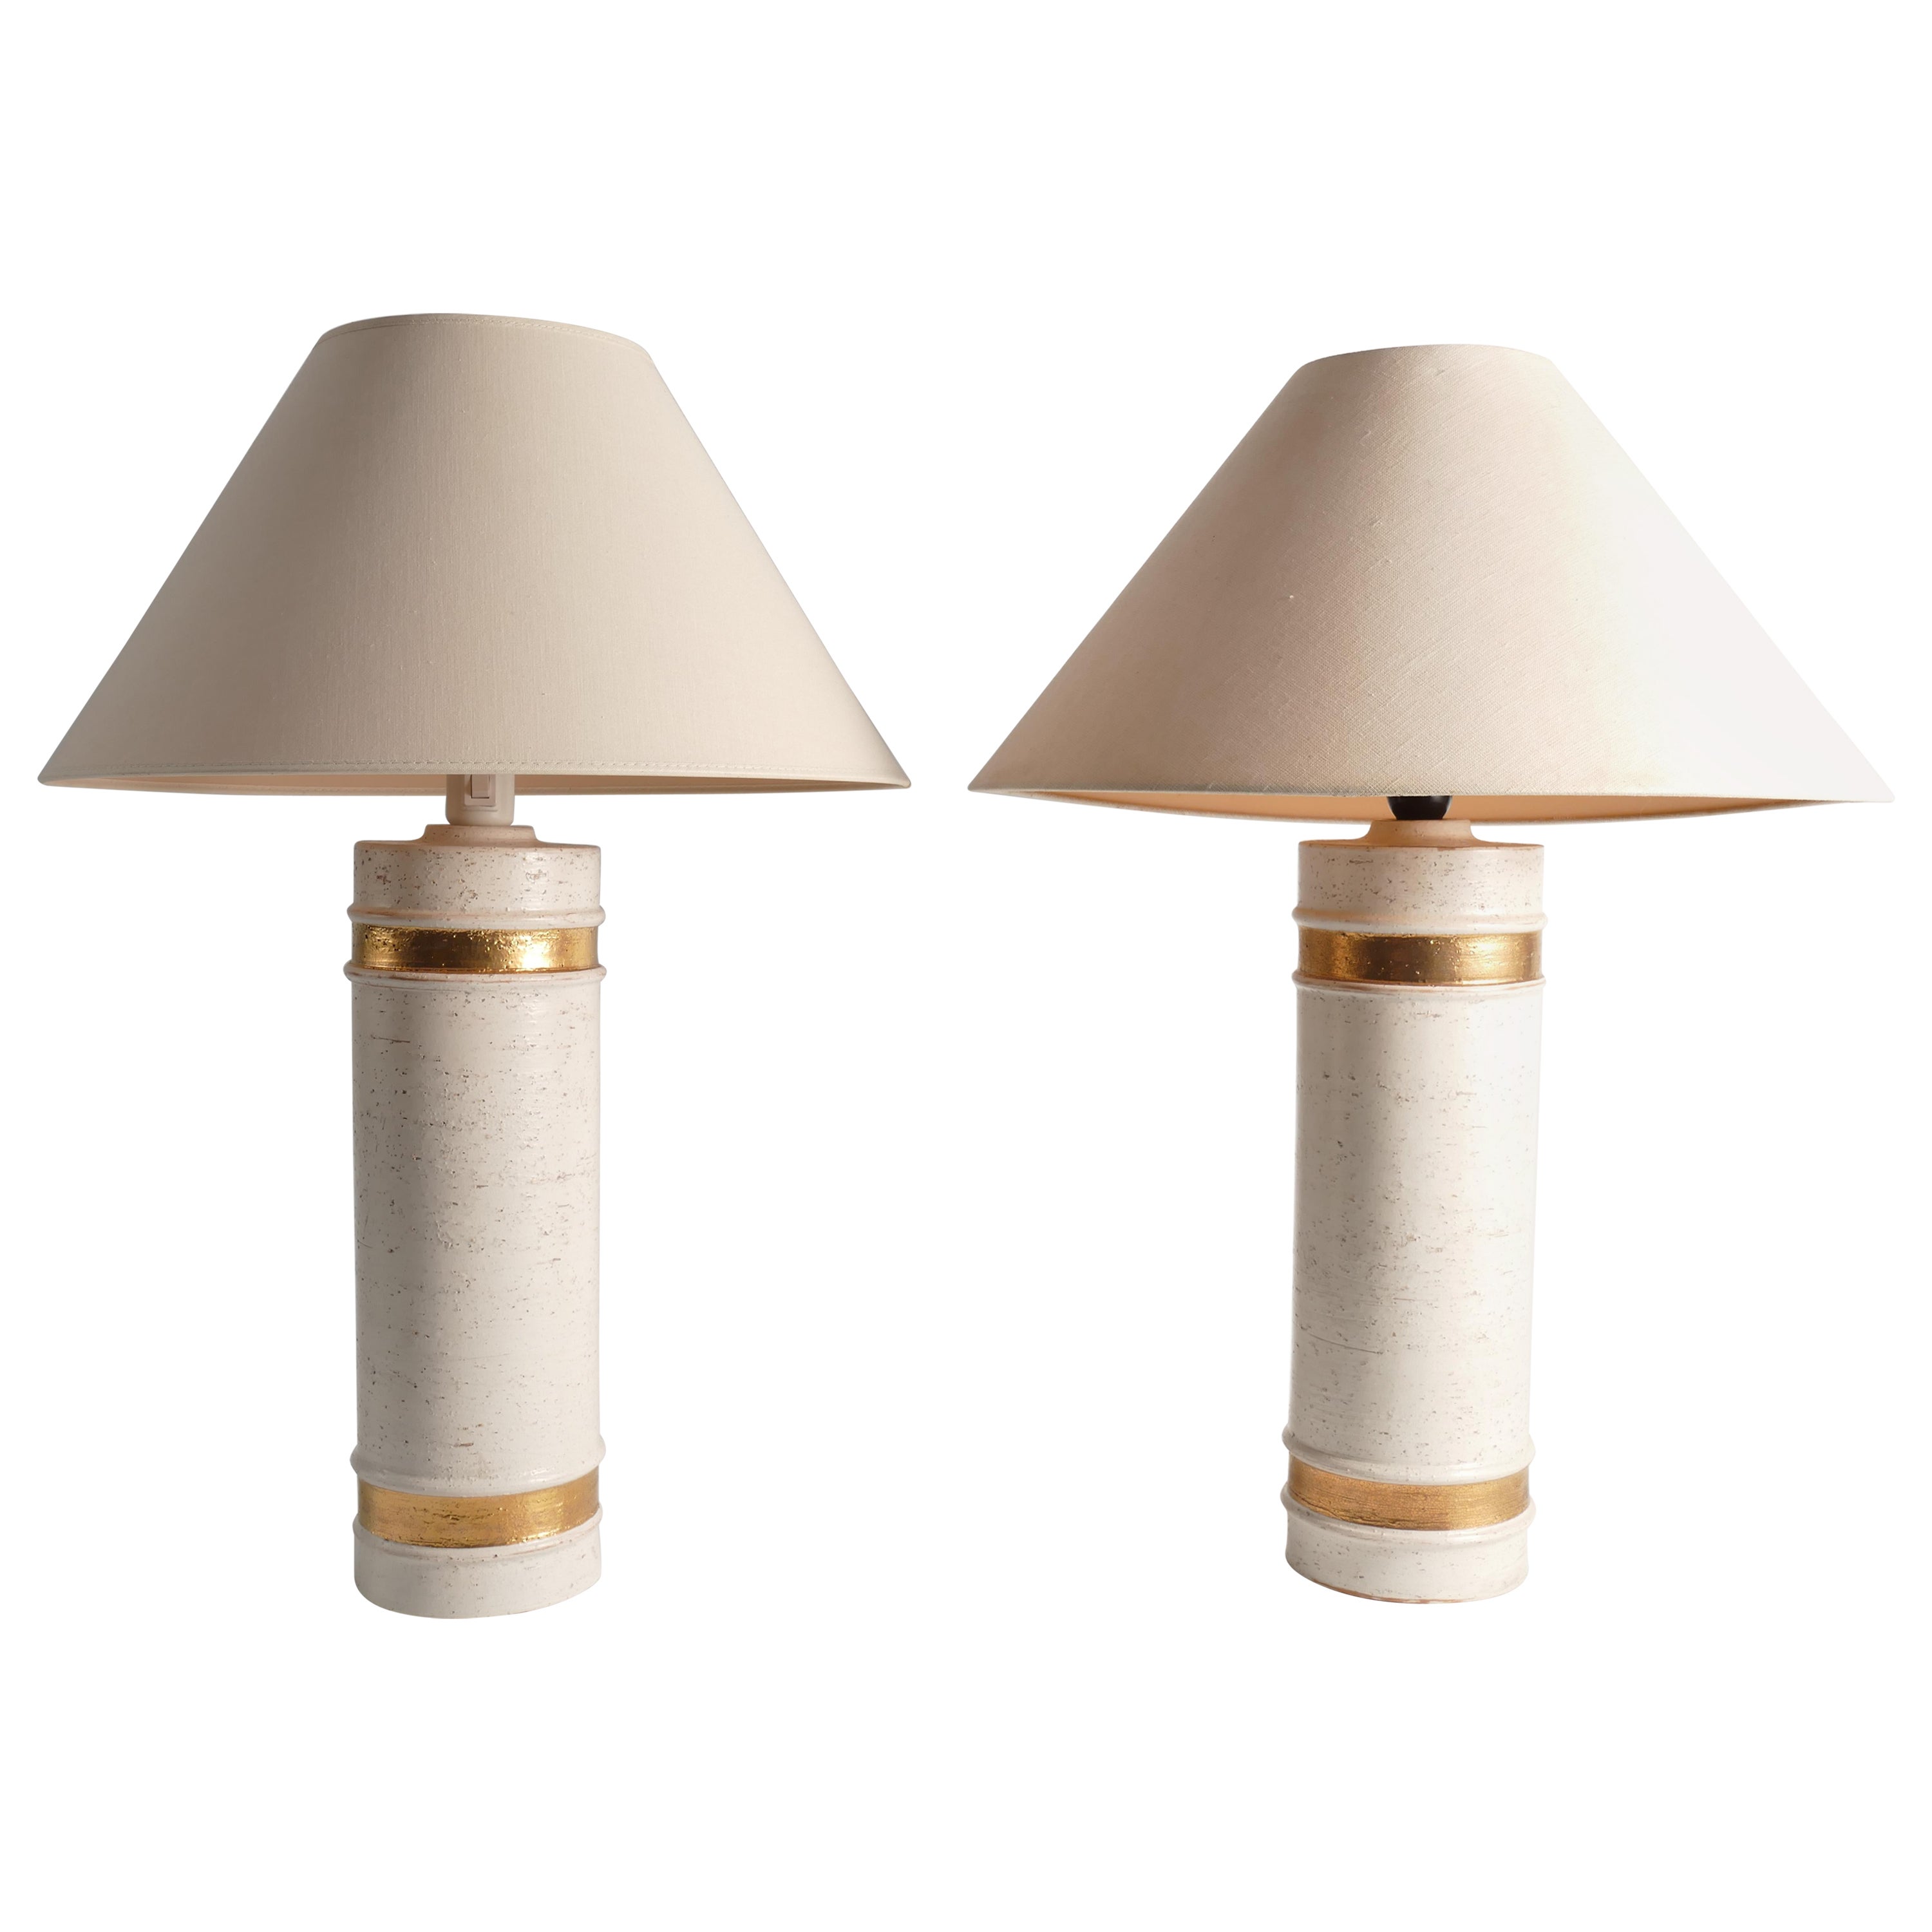 Mid-century Modern Ceramic Table Lamps by Bitossi for Bergboms, Set of 2, 1970's